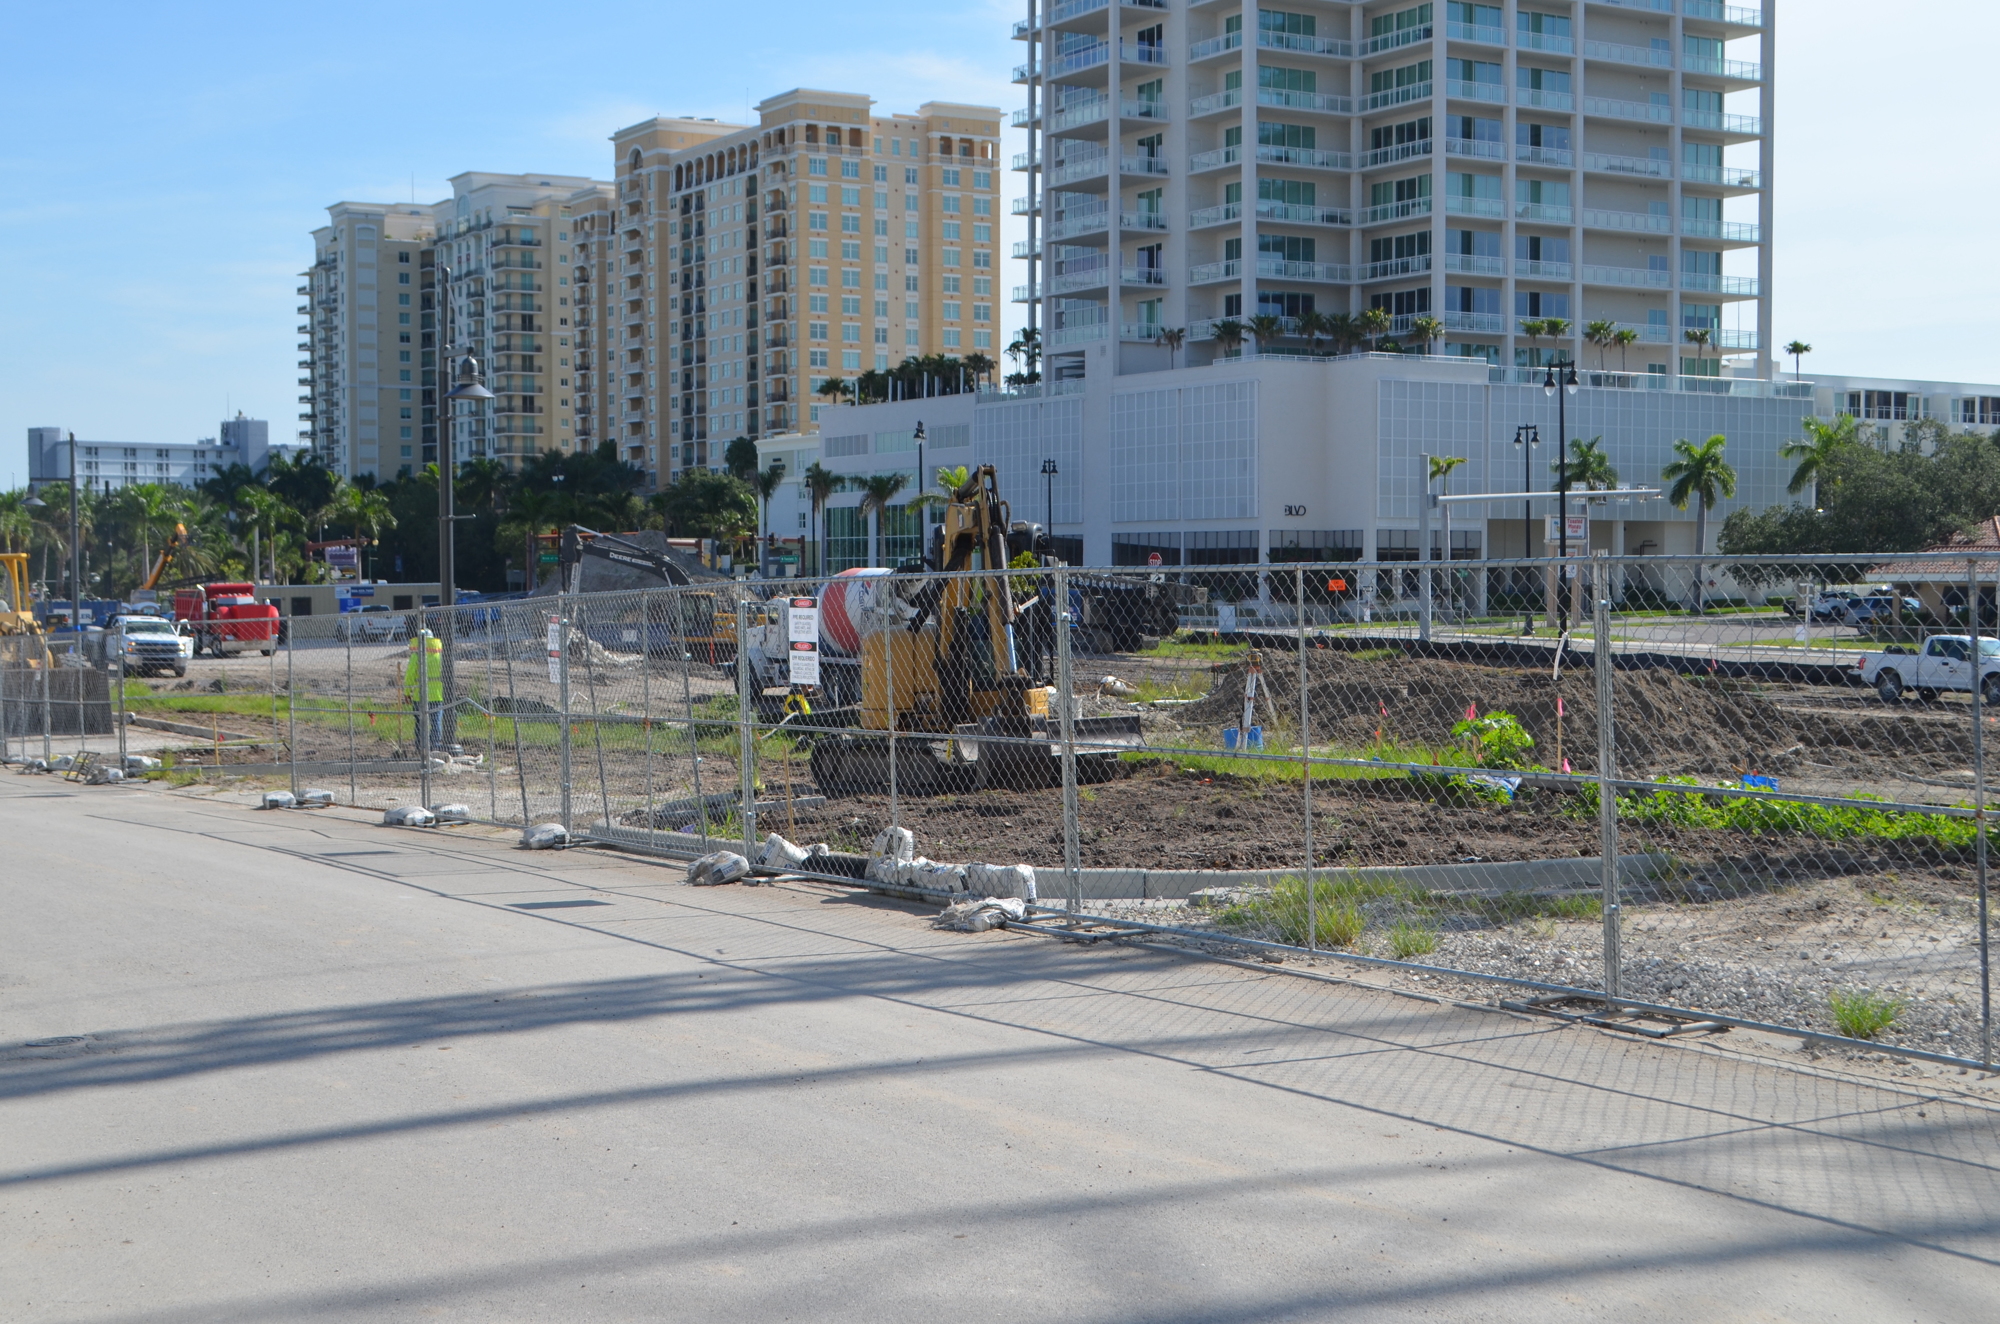 Site work is under way along  U.S.41 in The Quay where Lennar Muiltifamily Communities plans a mixed-use residential and retail development. (Photo by Andrew Warfield)